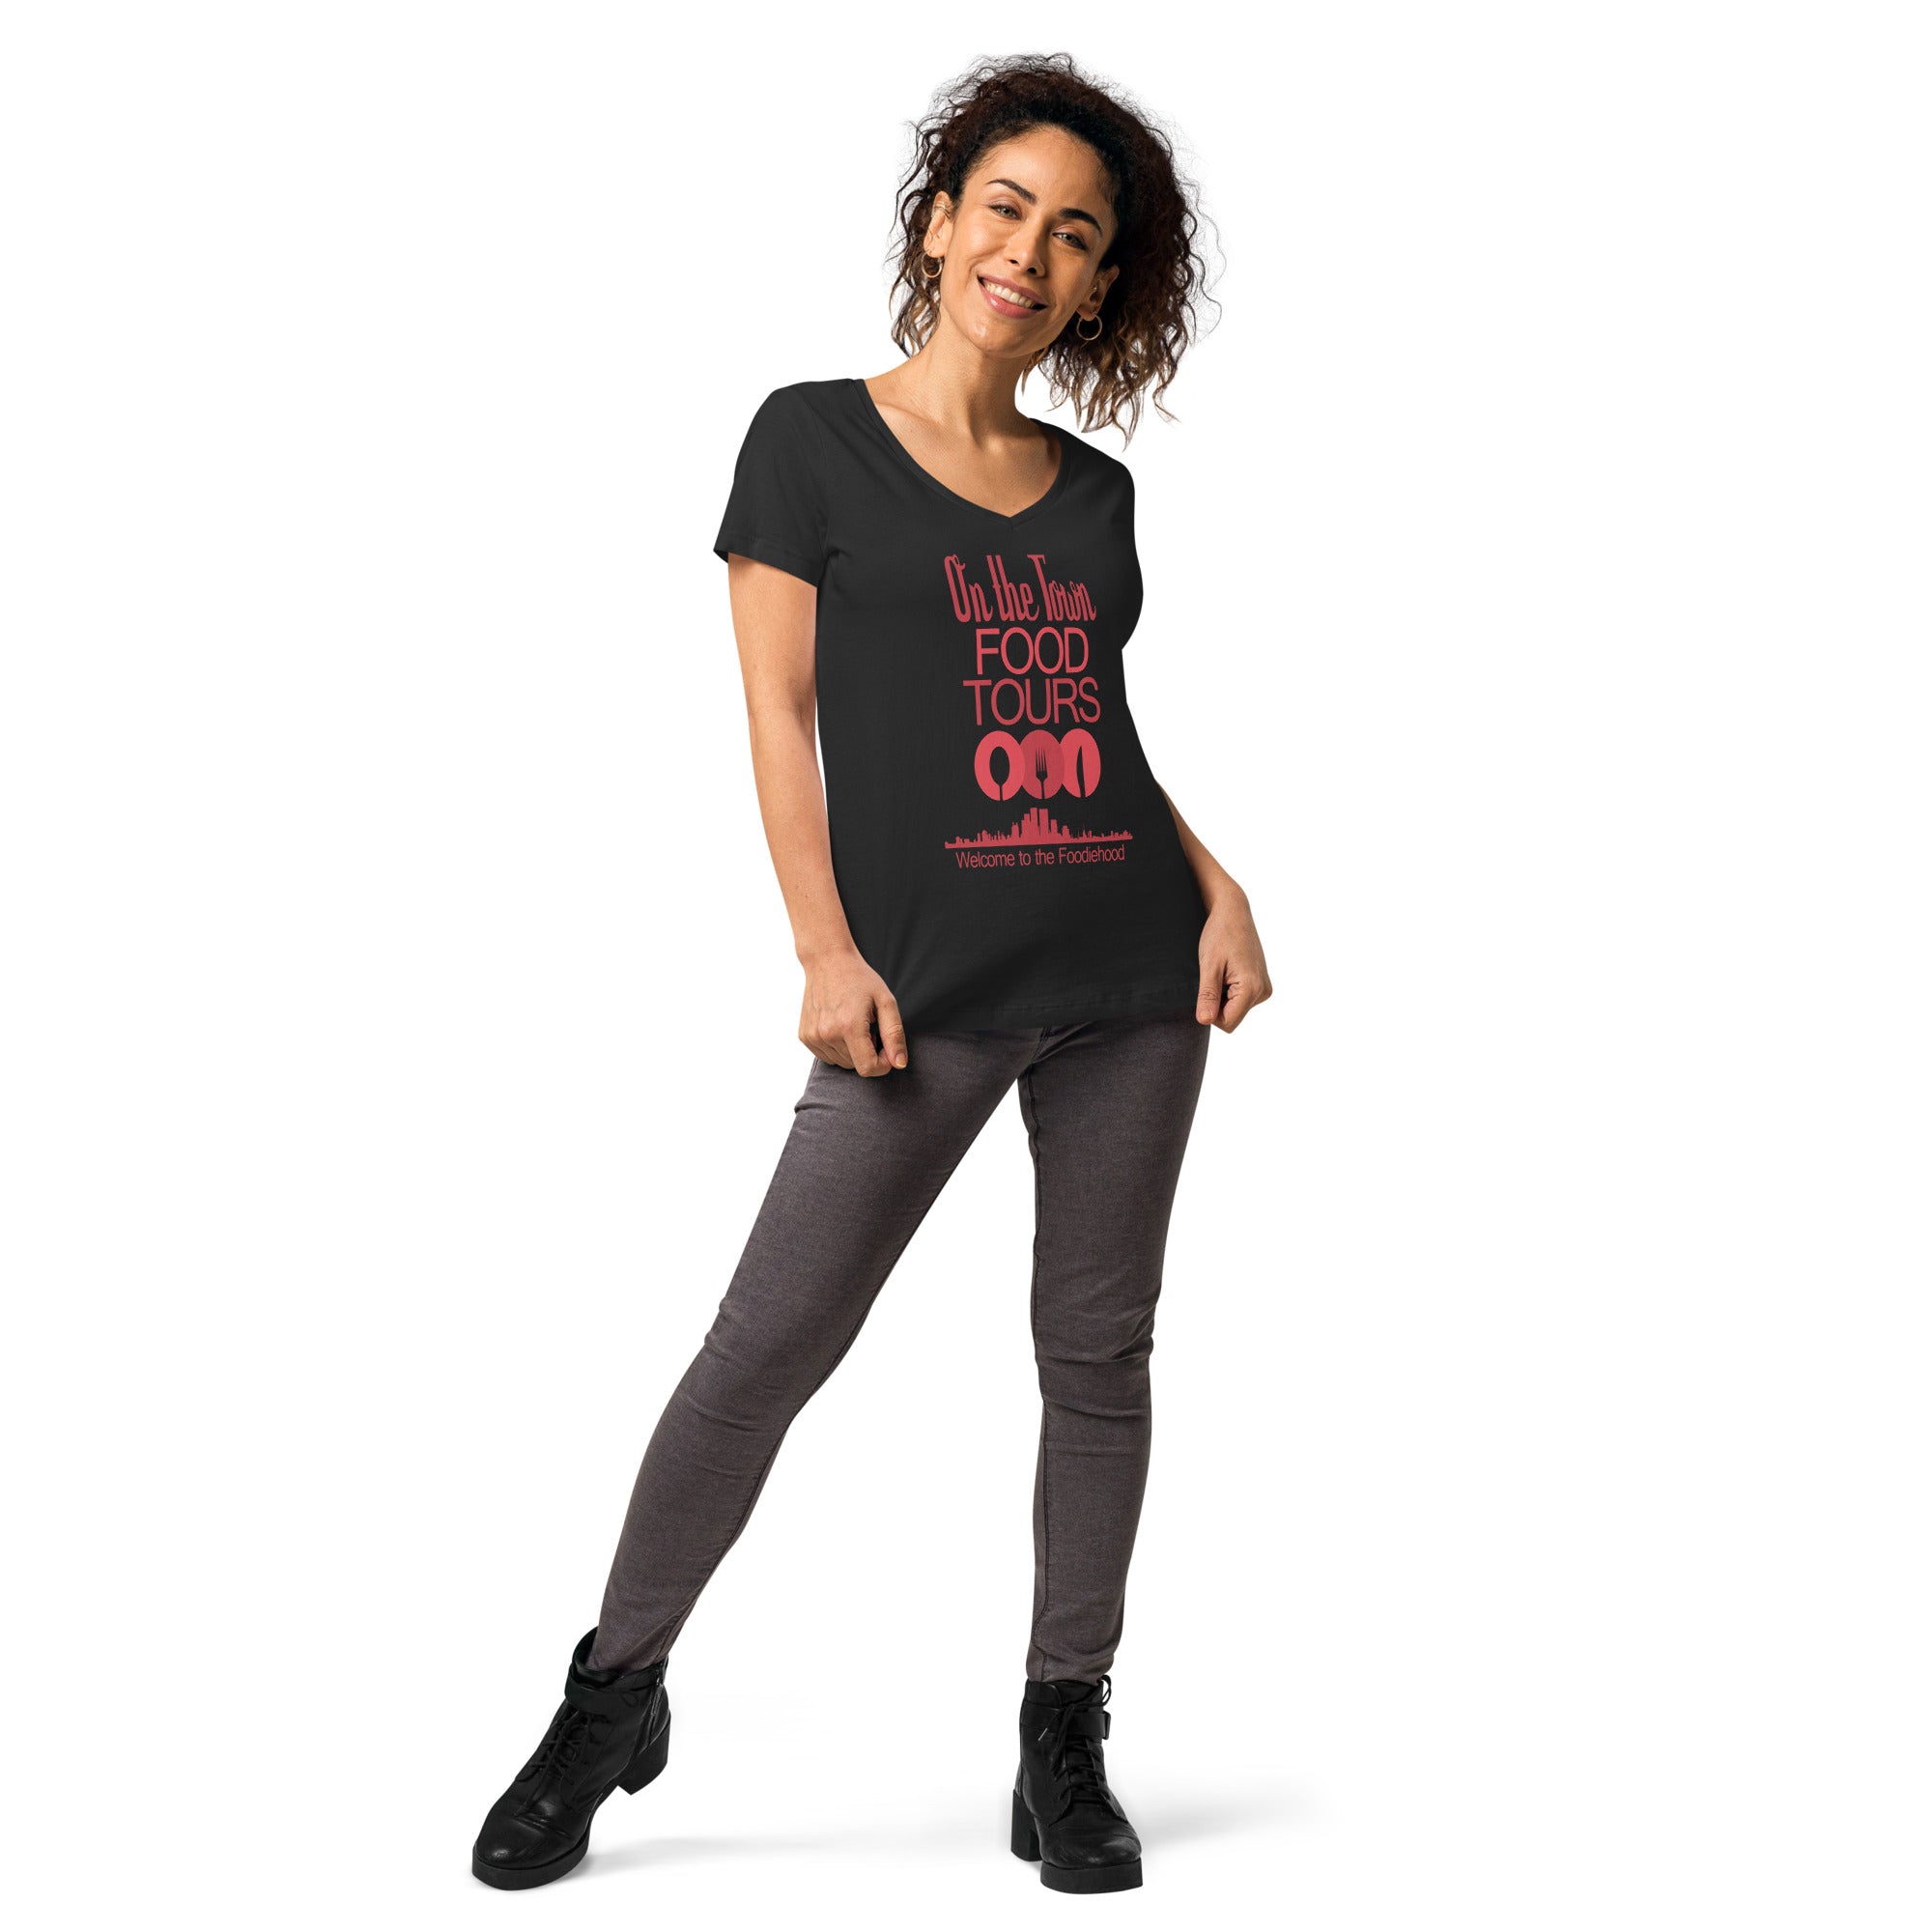 On the Town Food Tours Women’s fitted v-neck t-shirt